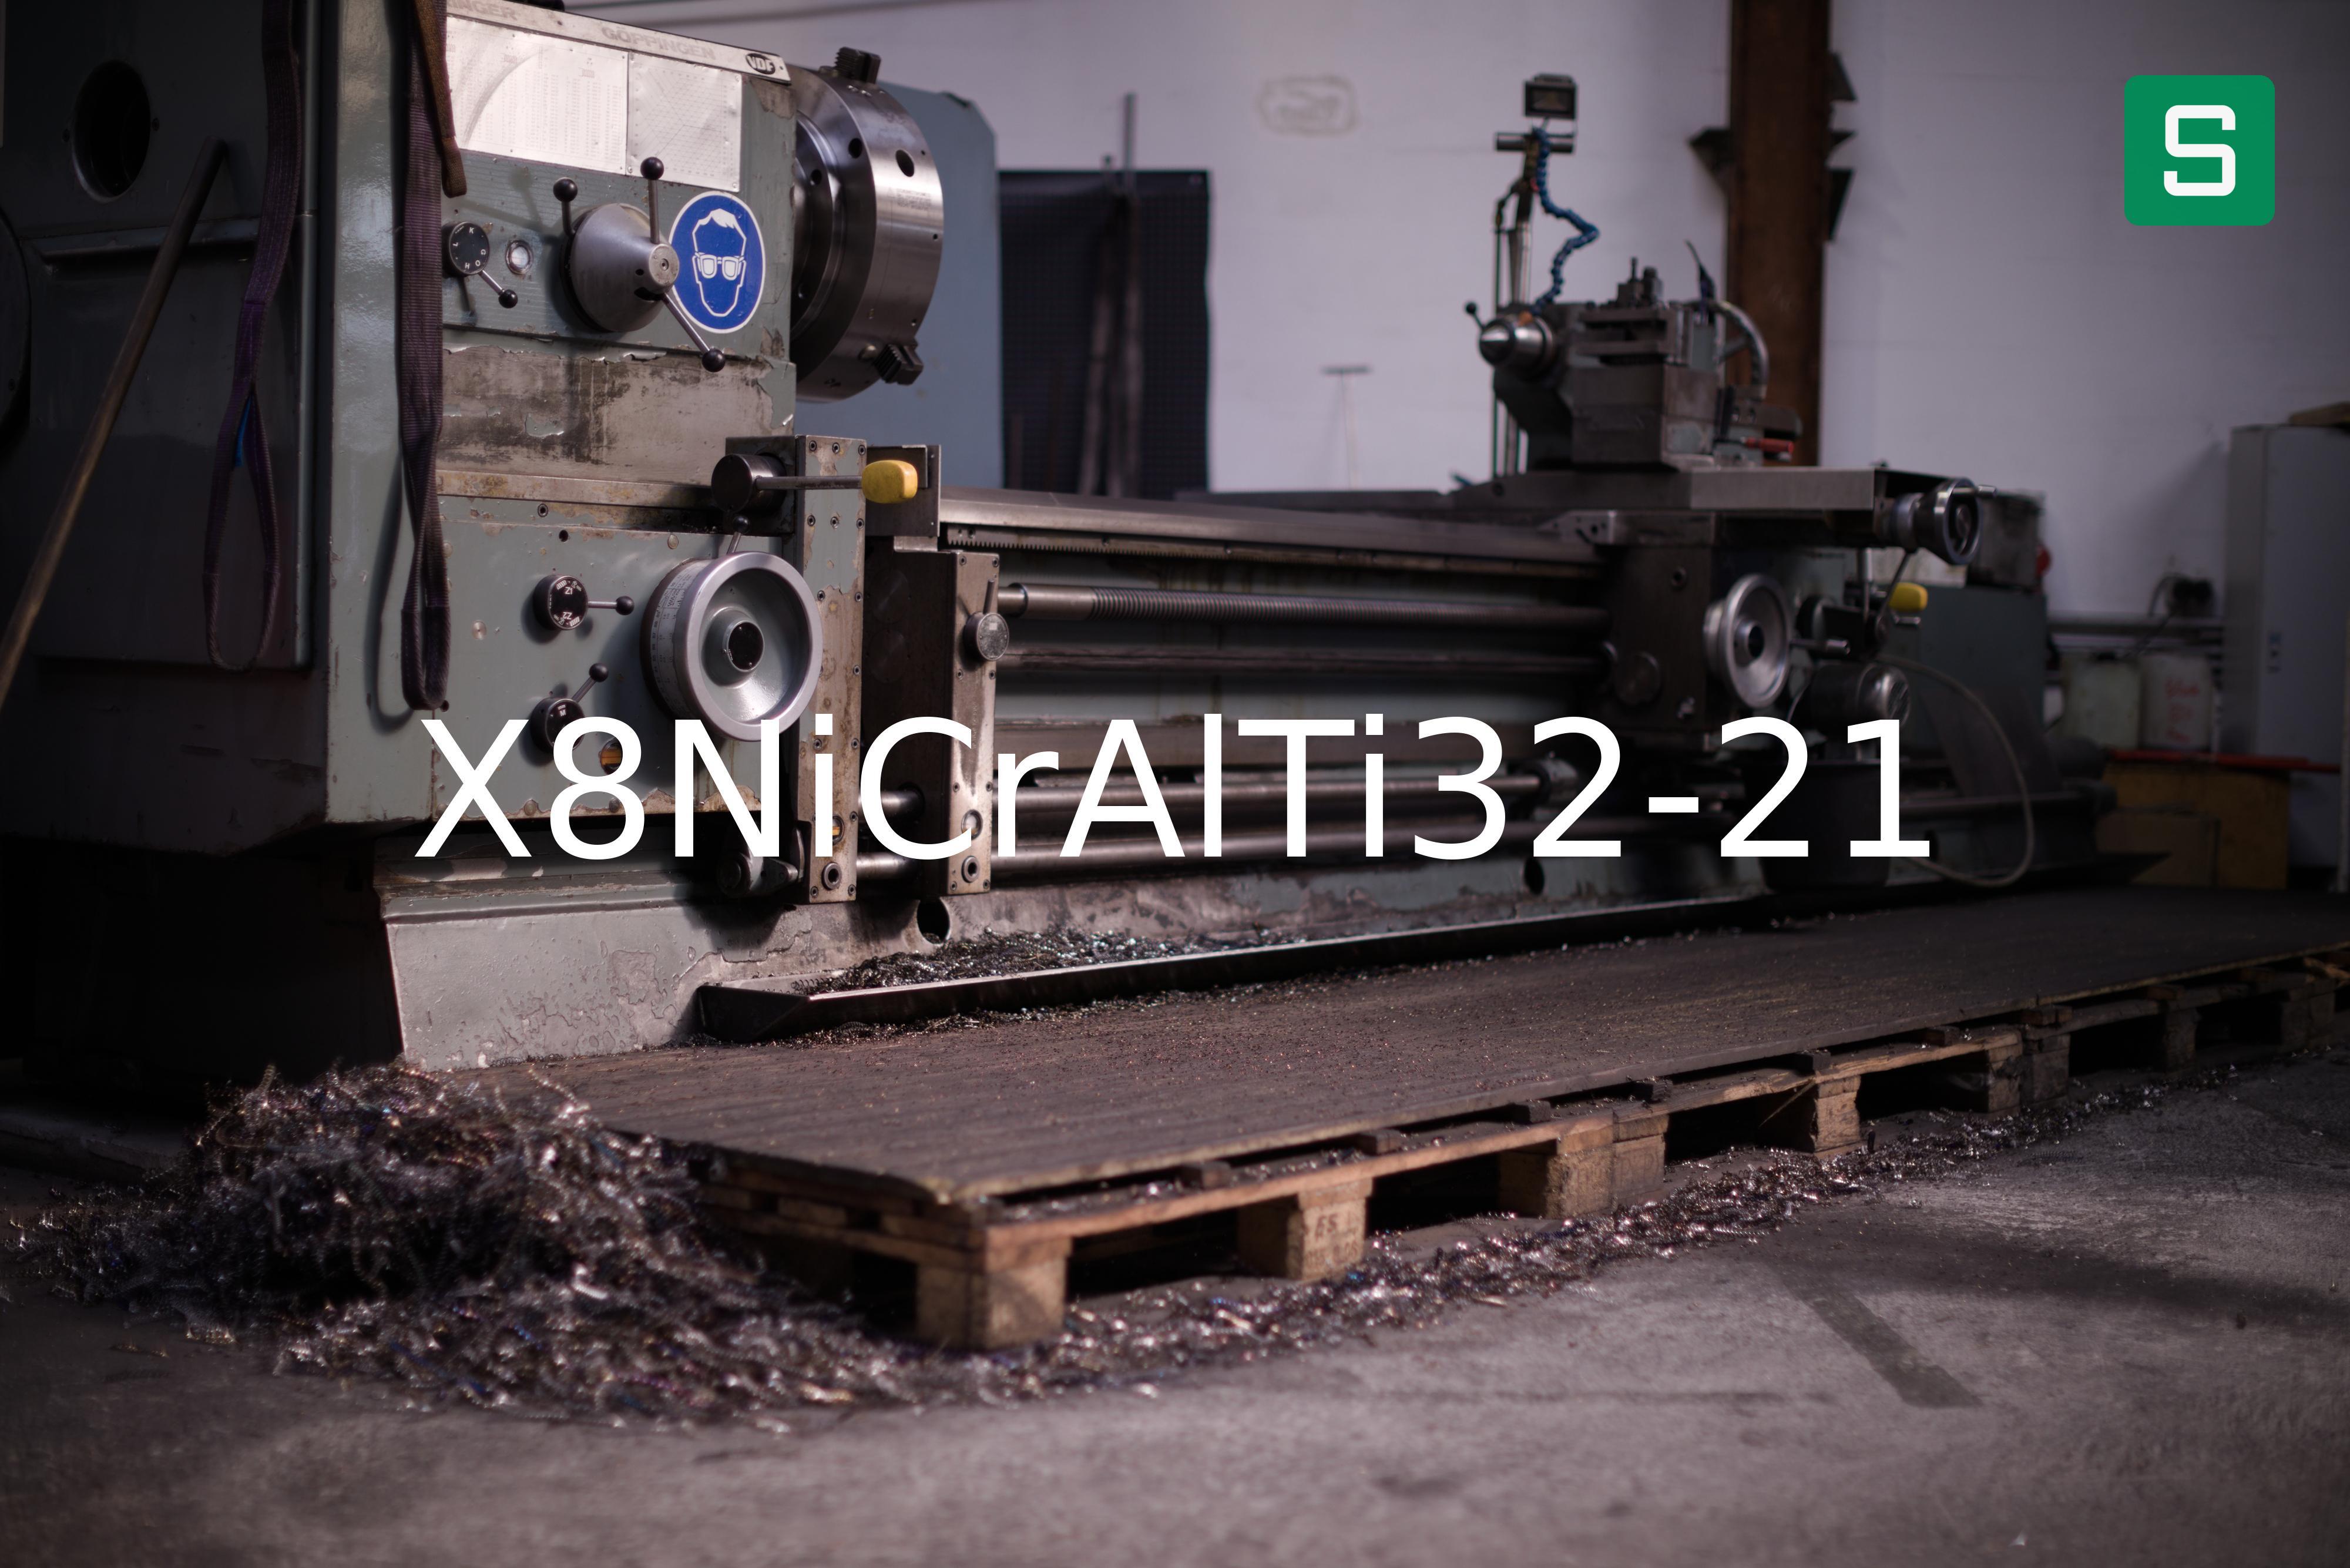 Steel Material: X8NiCrAlTi32-21